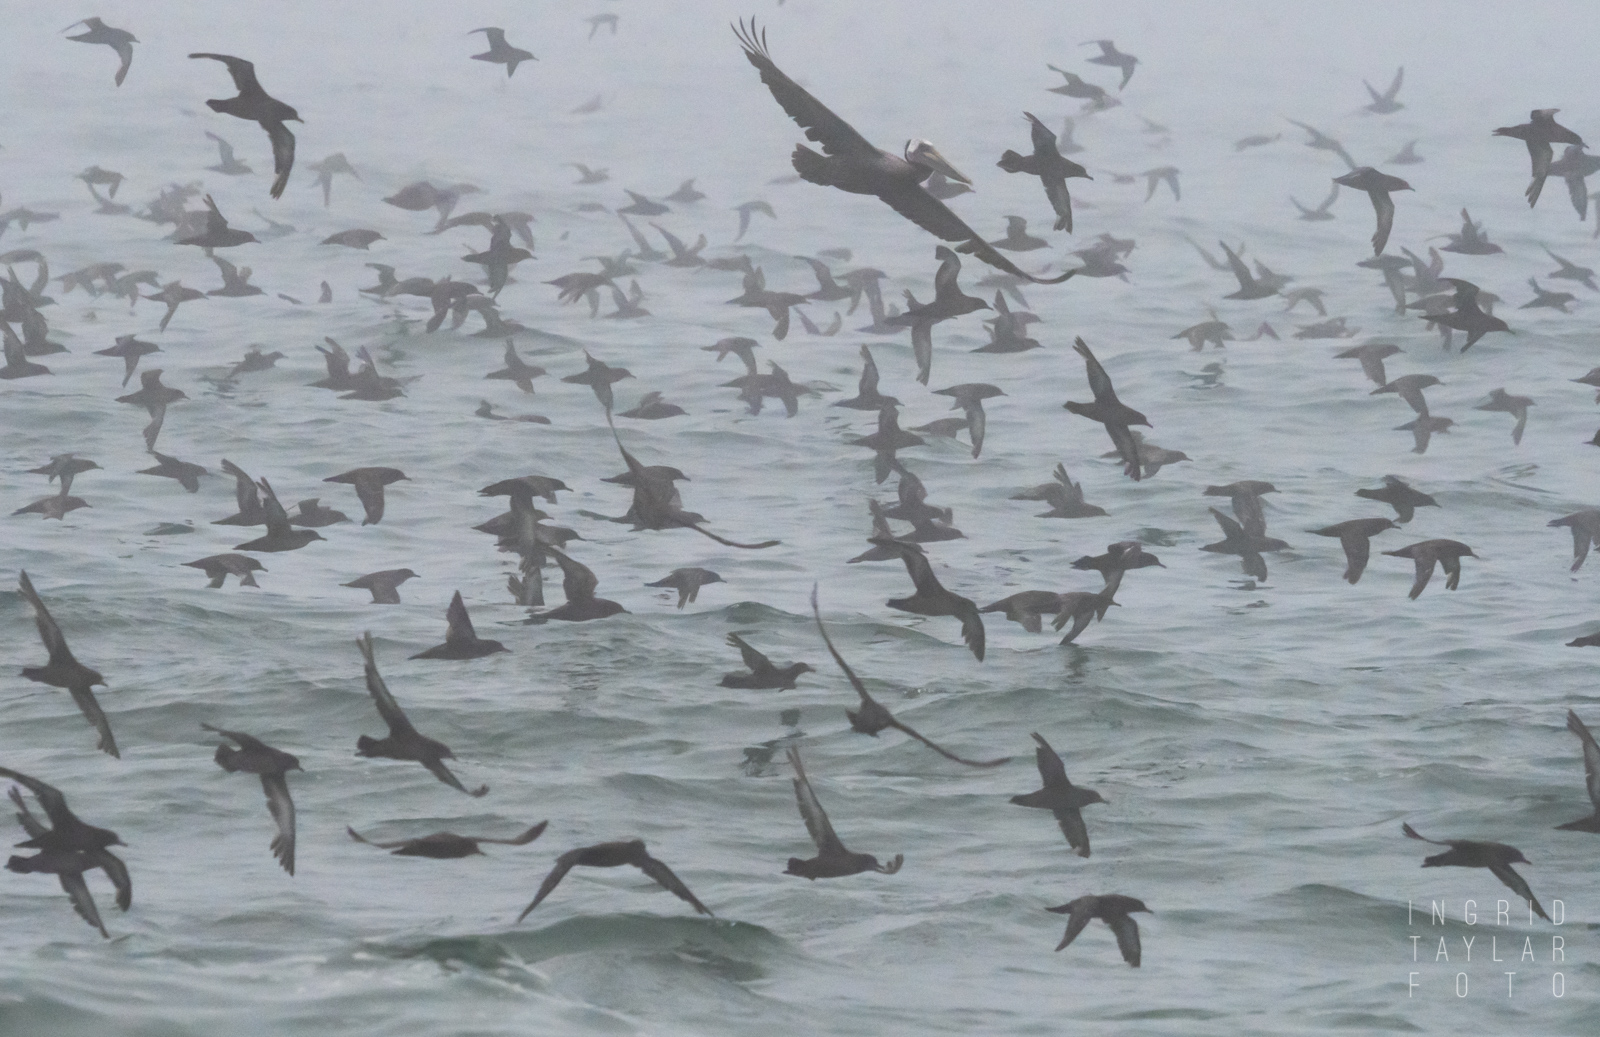 Sooty Shearwaters in the Fog on Monterey Bay